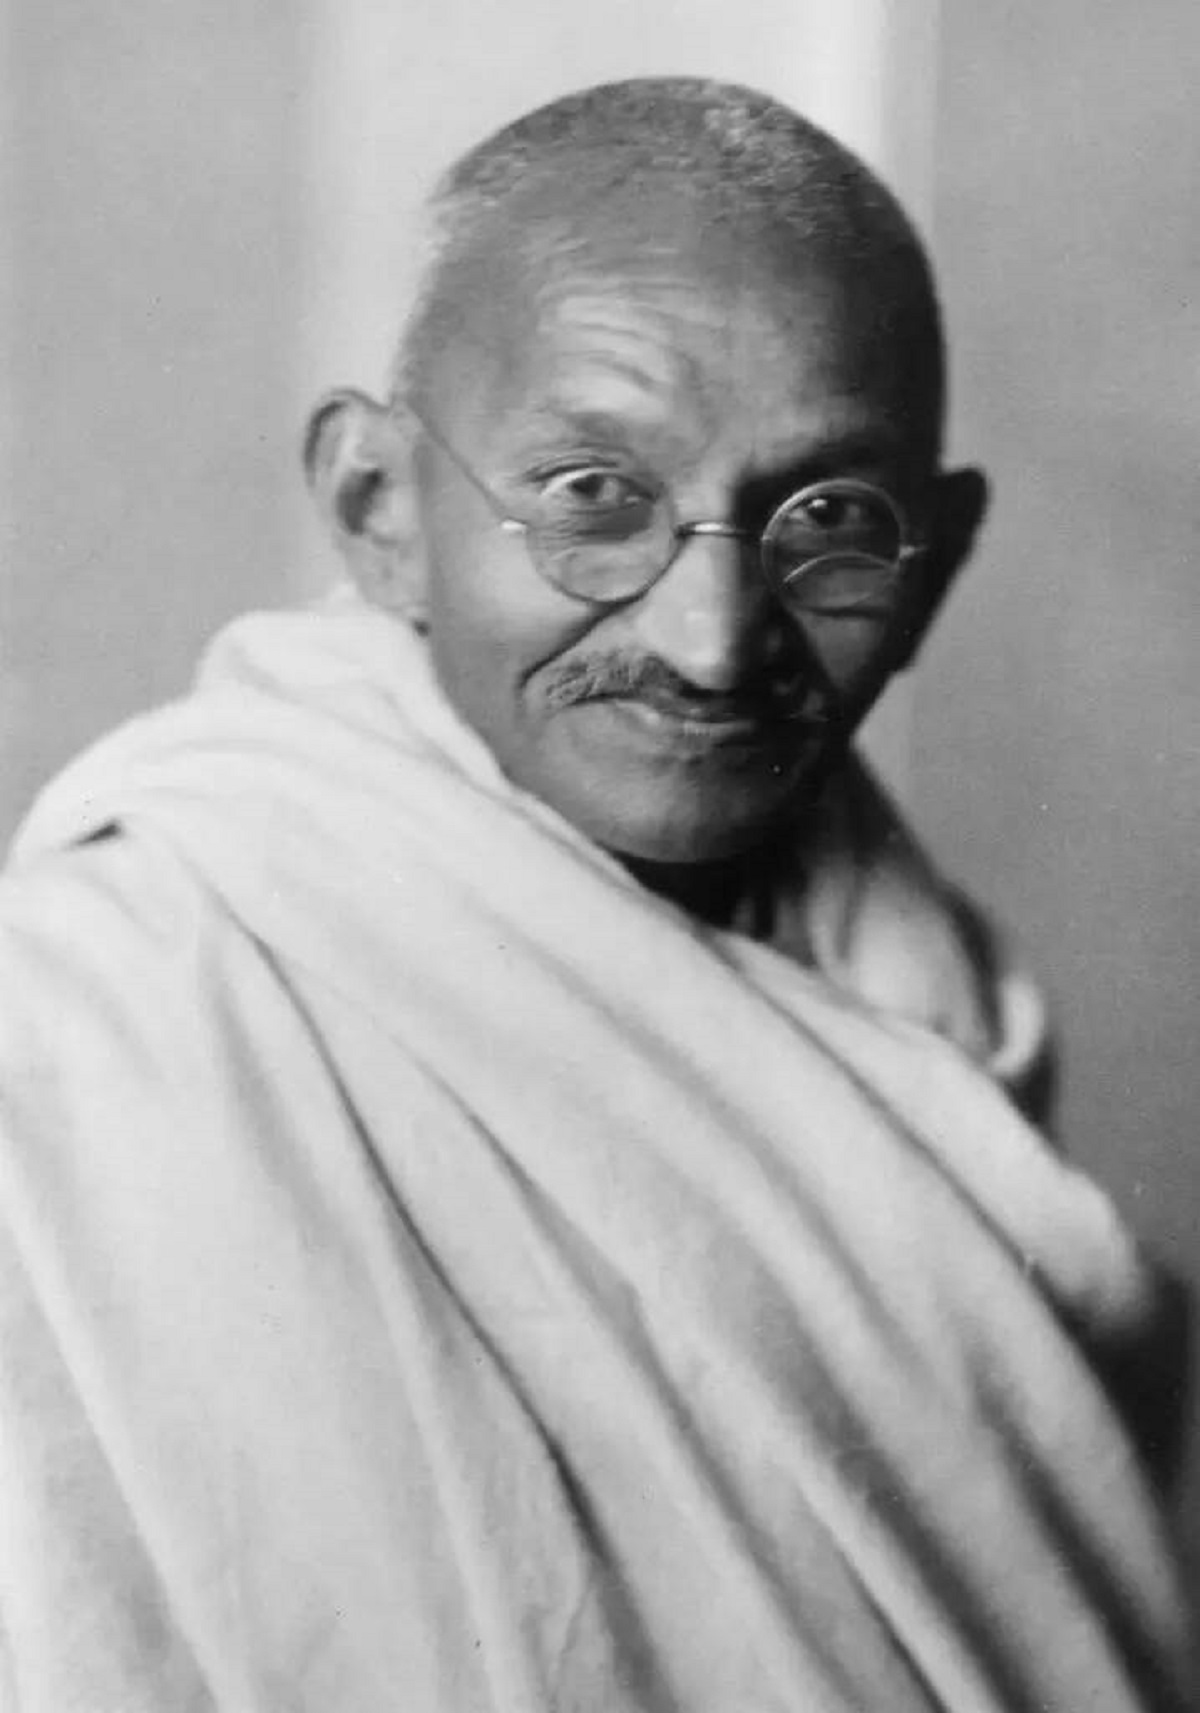 You're, of course, familiar with Mahatma Gandhi...